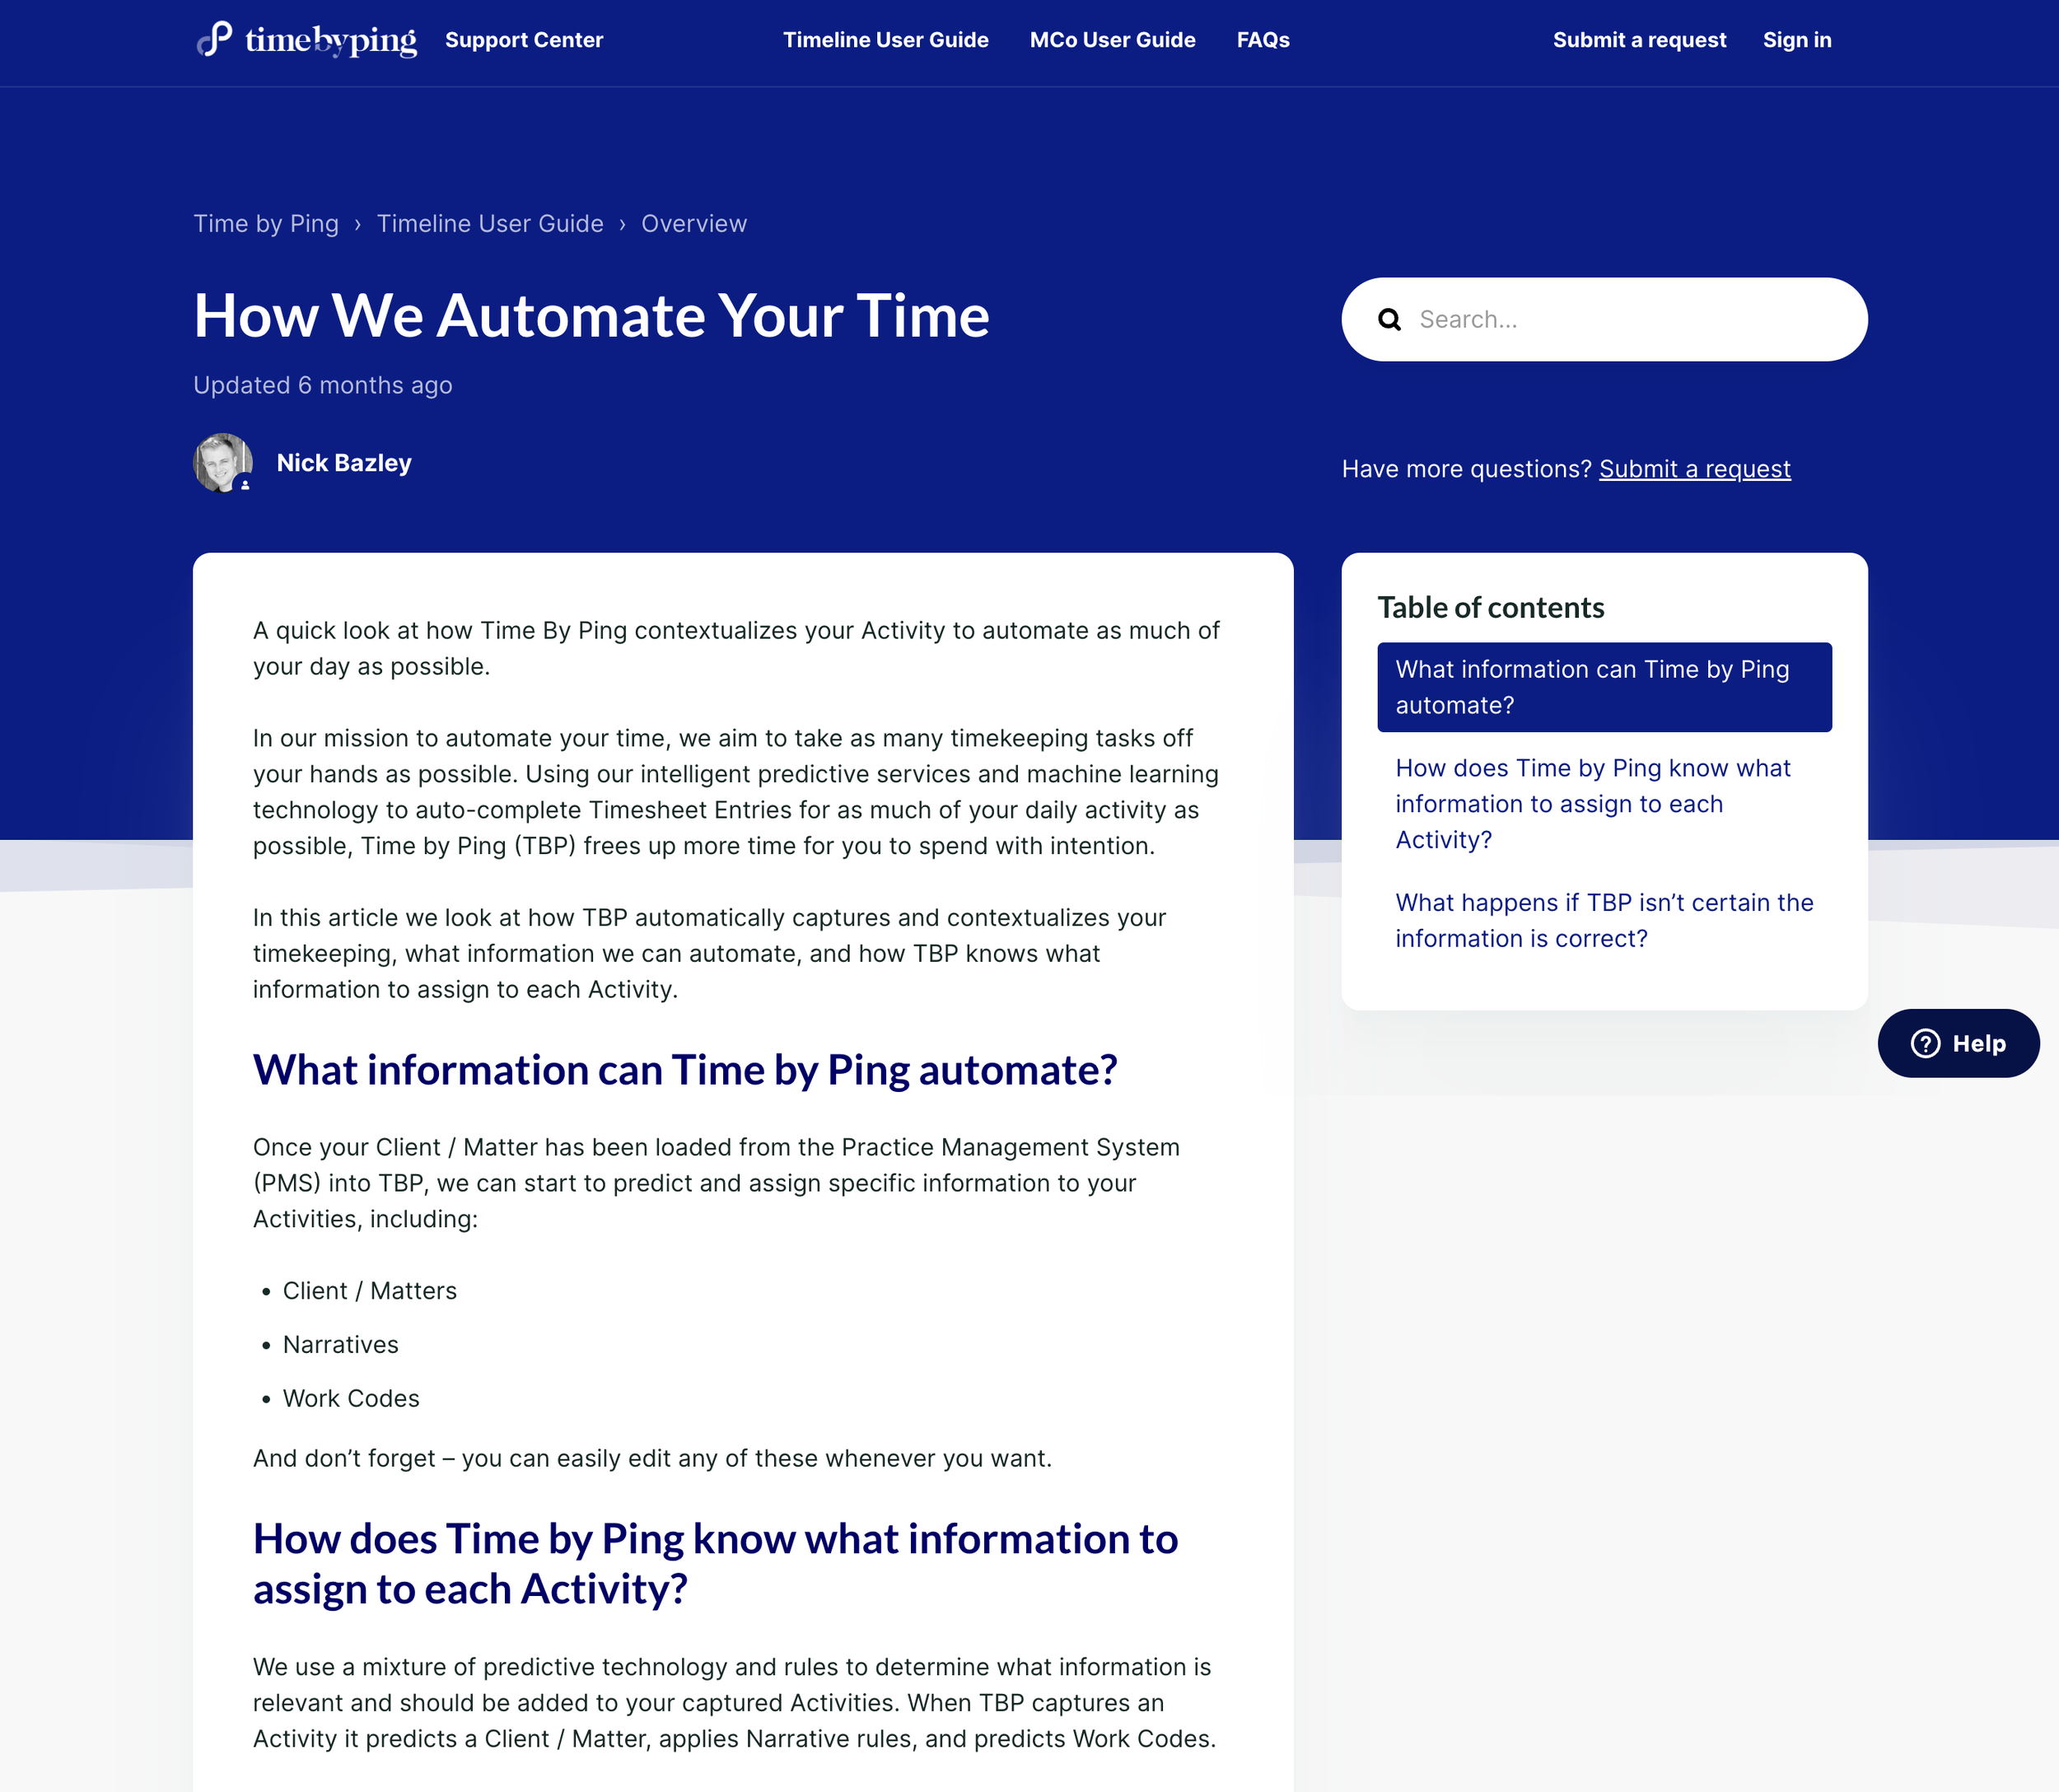 Automating time guide